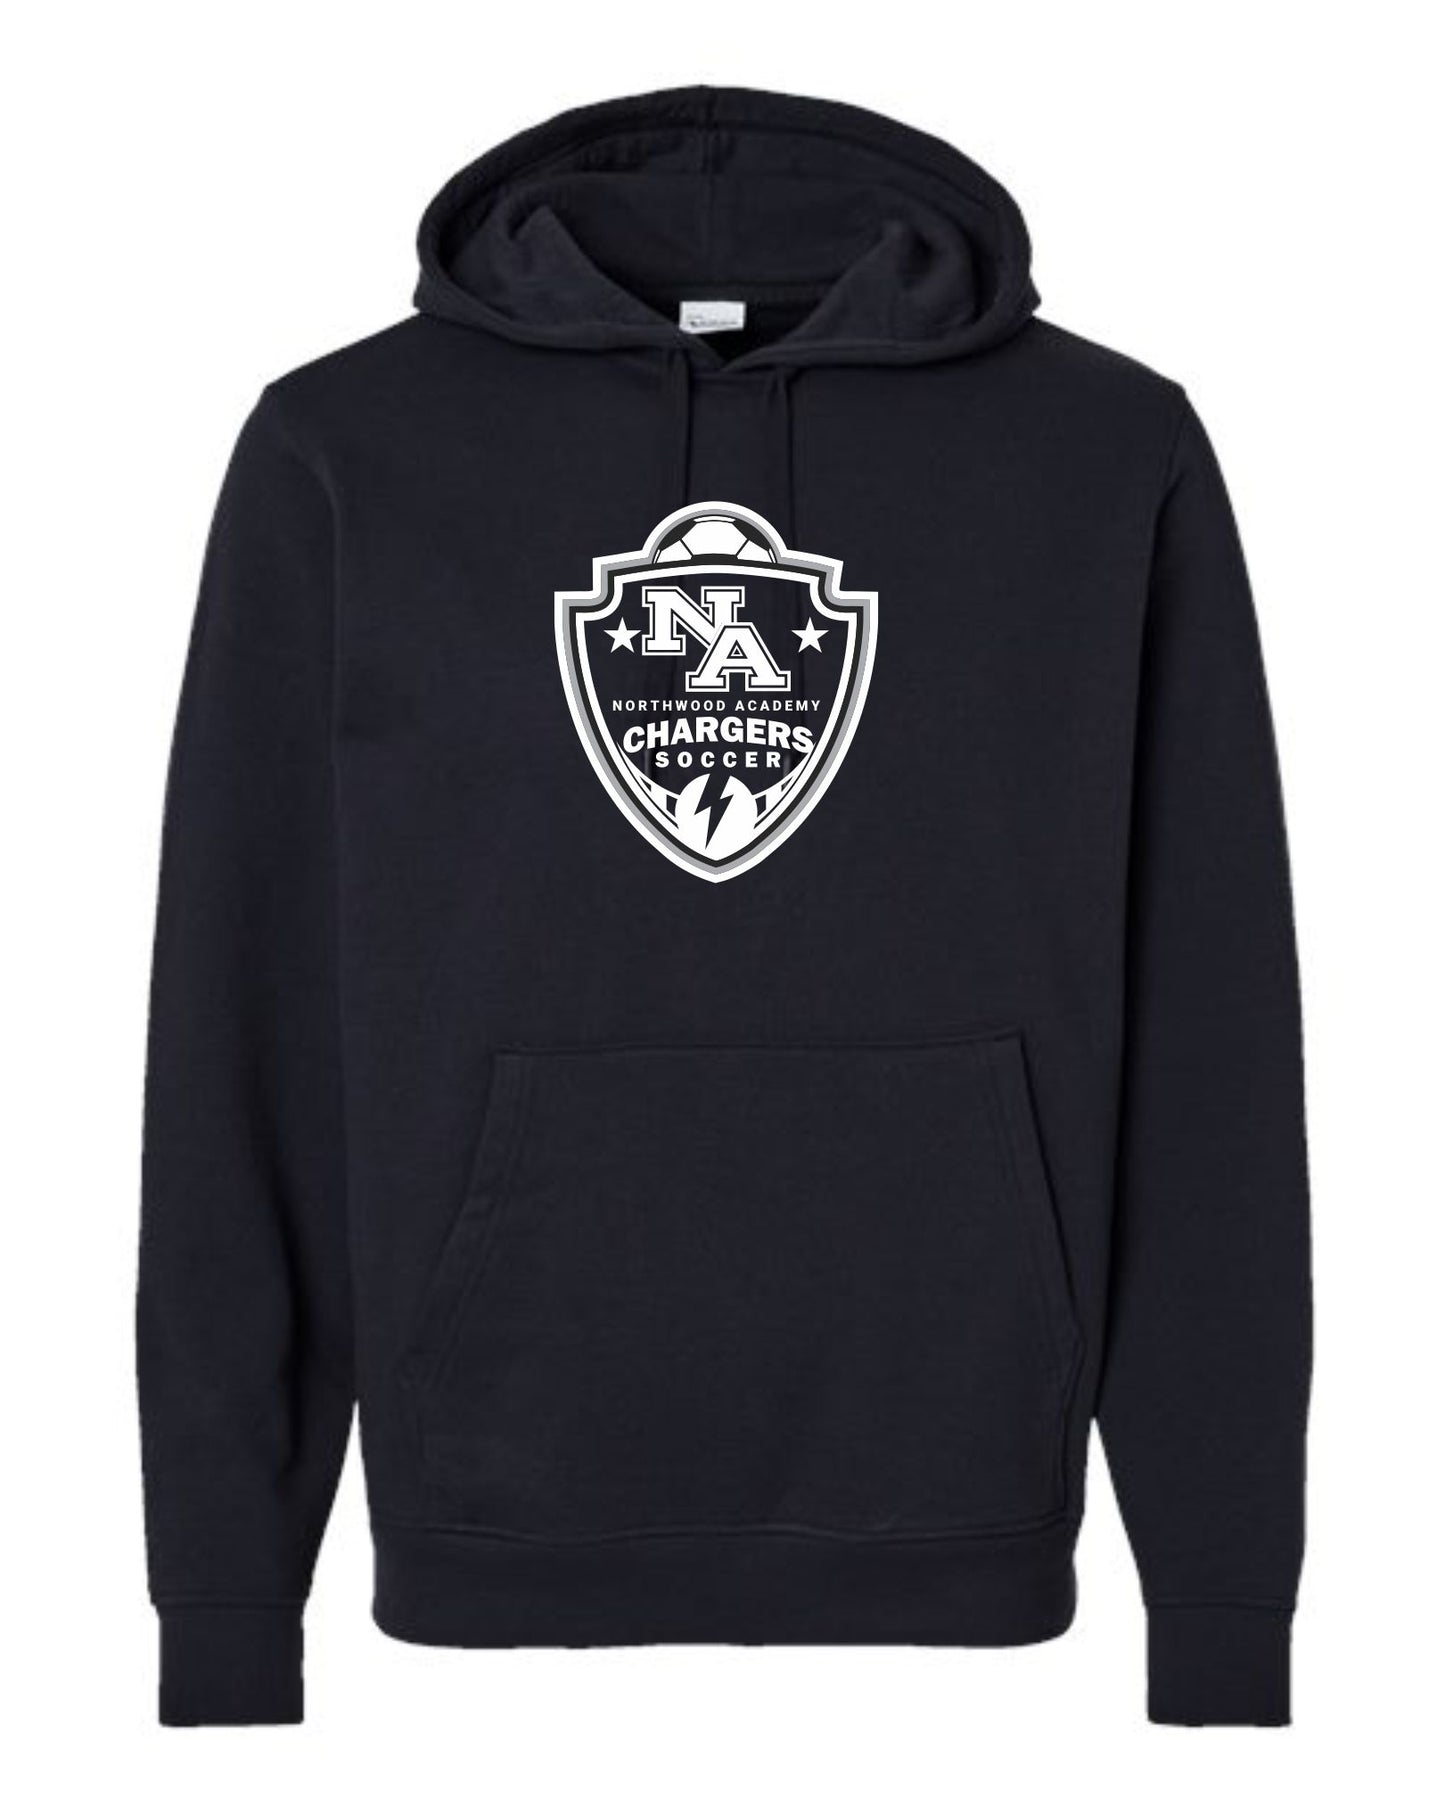 Soccer Hoodie Approved School Attire